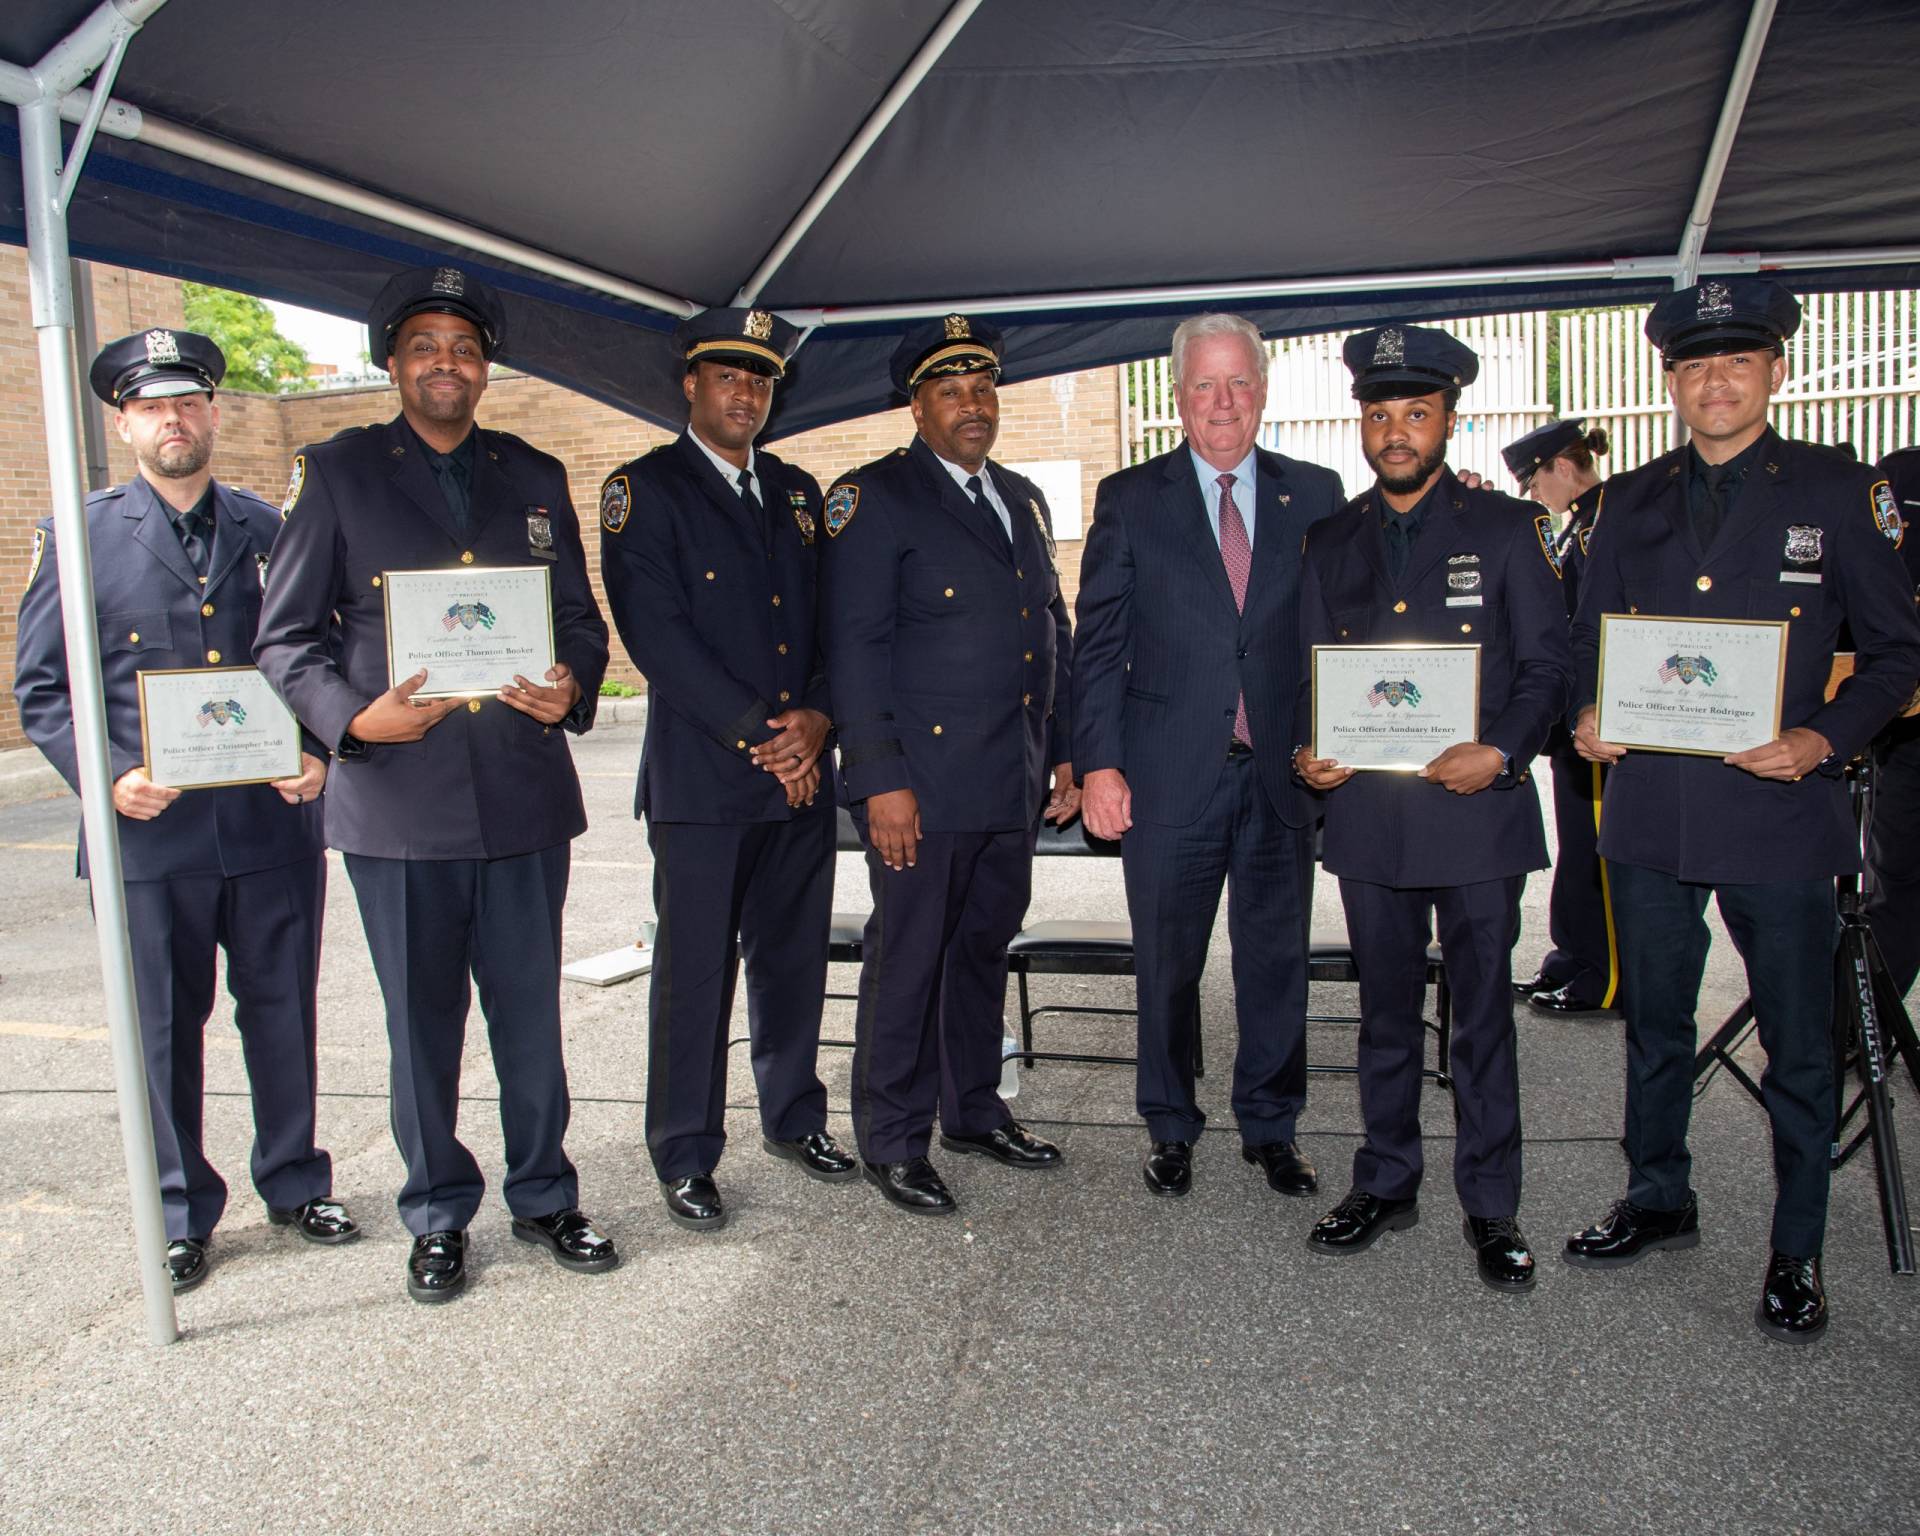 Shout out Awards 73rd pct